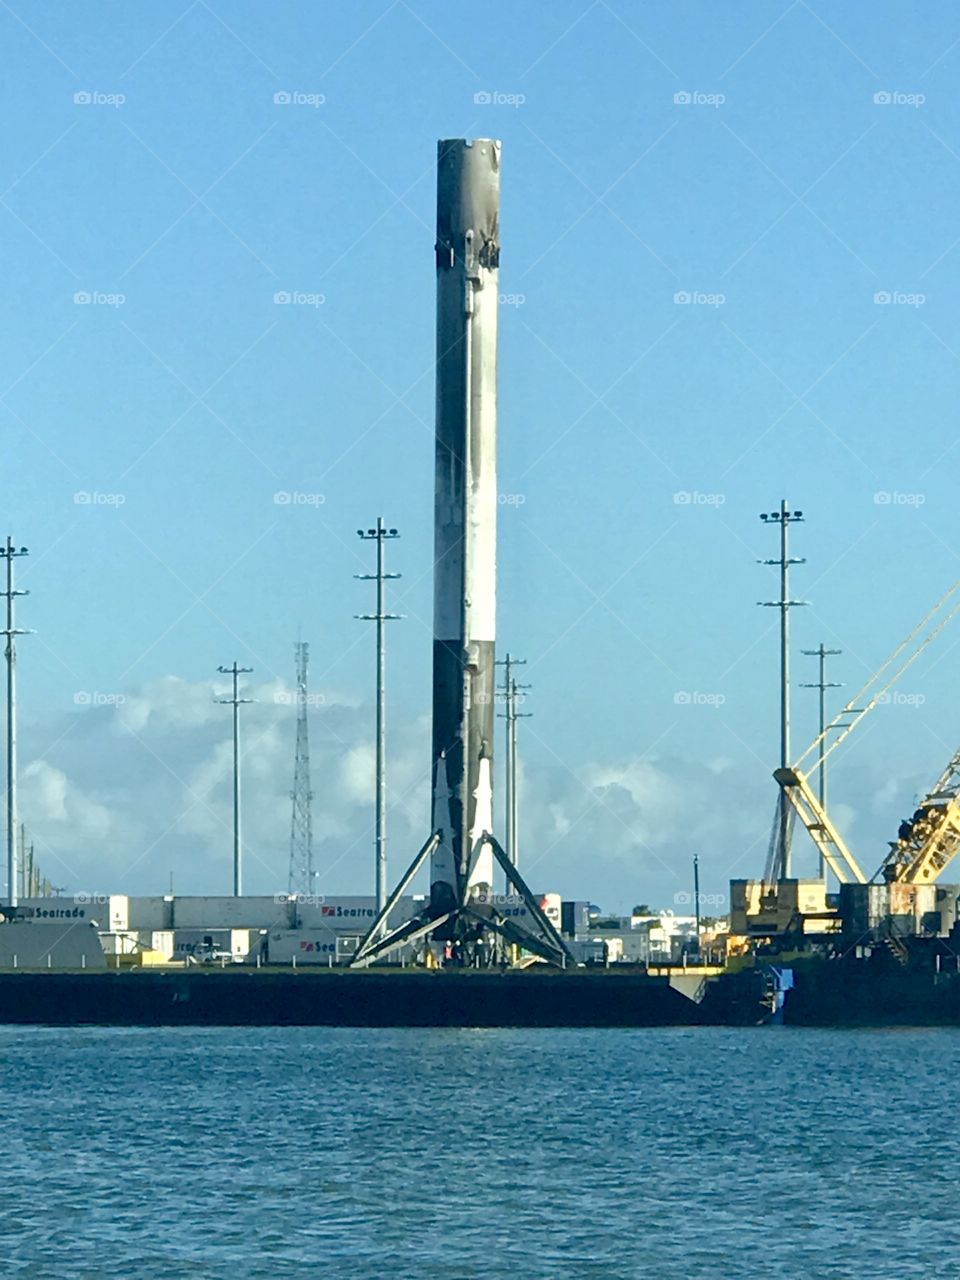 SpaceX Falcon9 back in Port Canaveral on OCISLY 